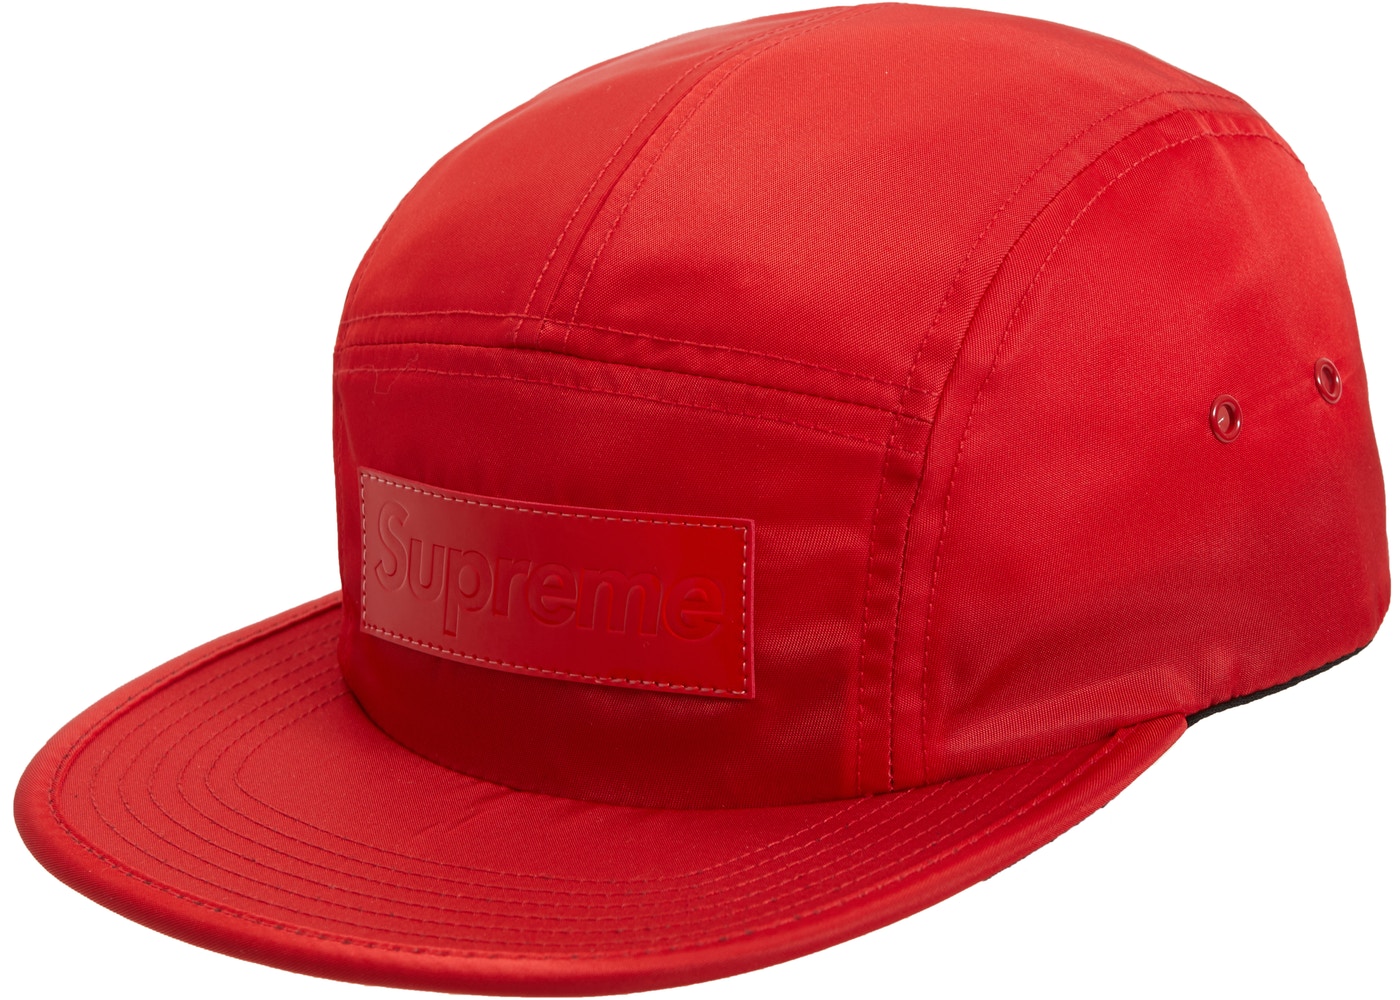 Supreme Patent Leather Patch Camp Cap Red - StockX News